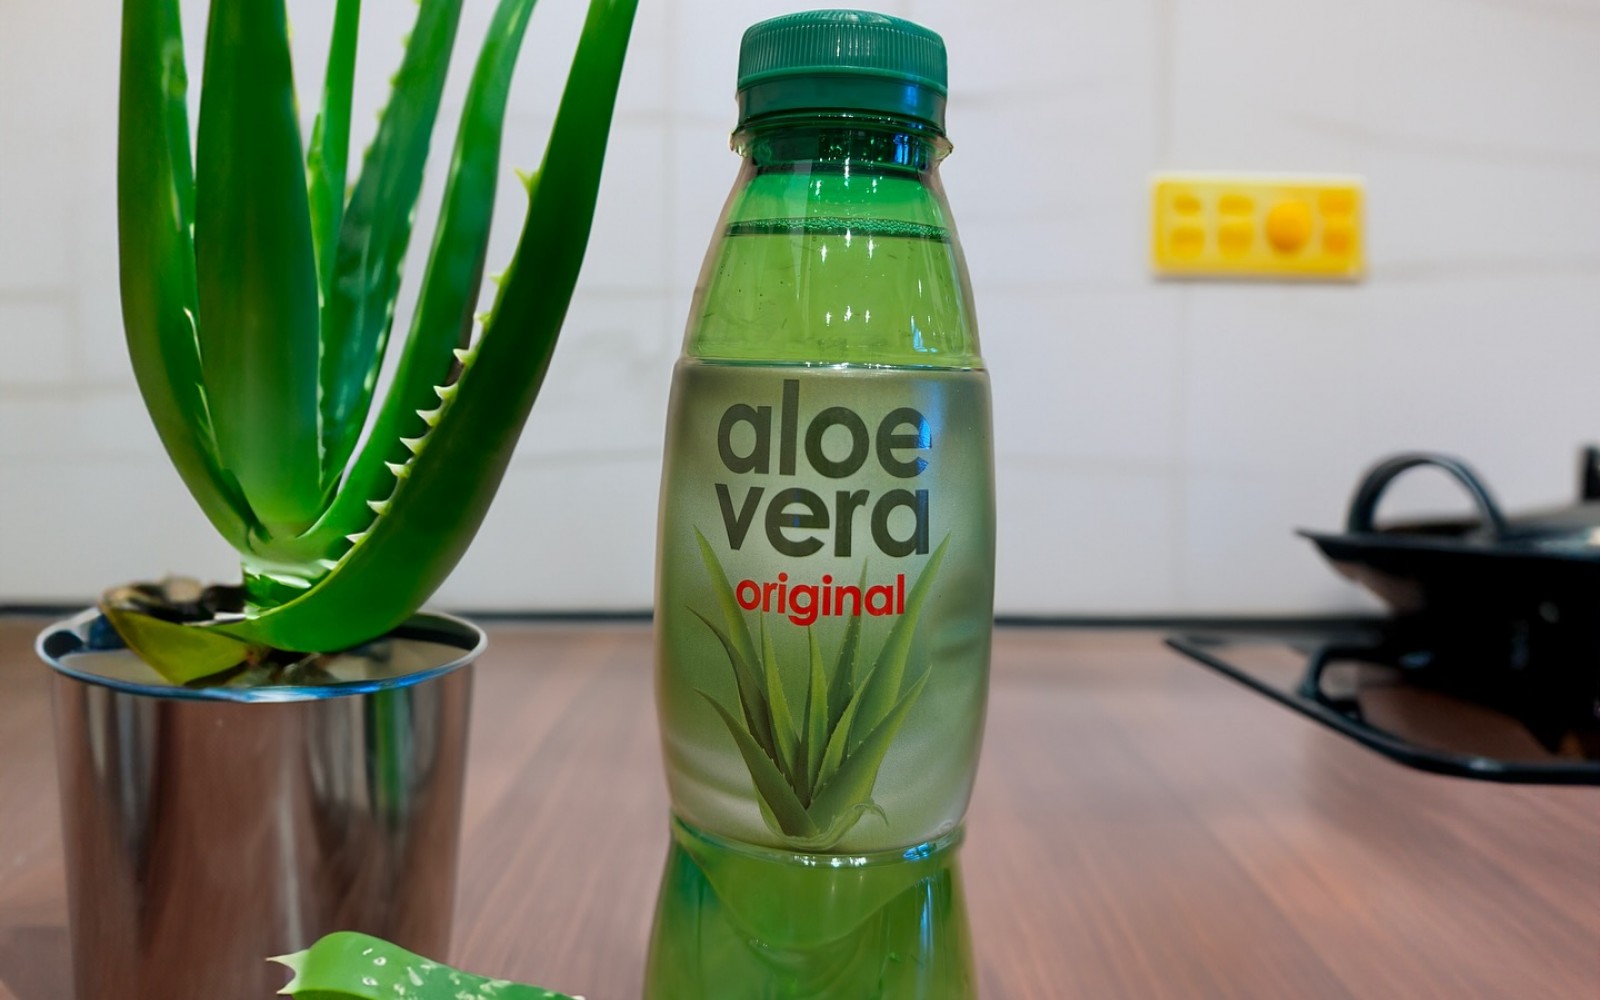 Start the new year with a quality Aloe Vera recharge!